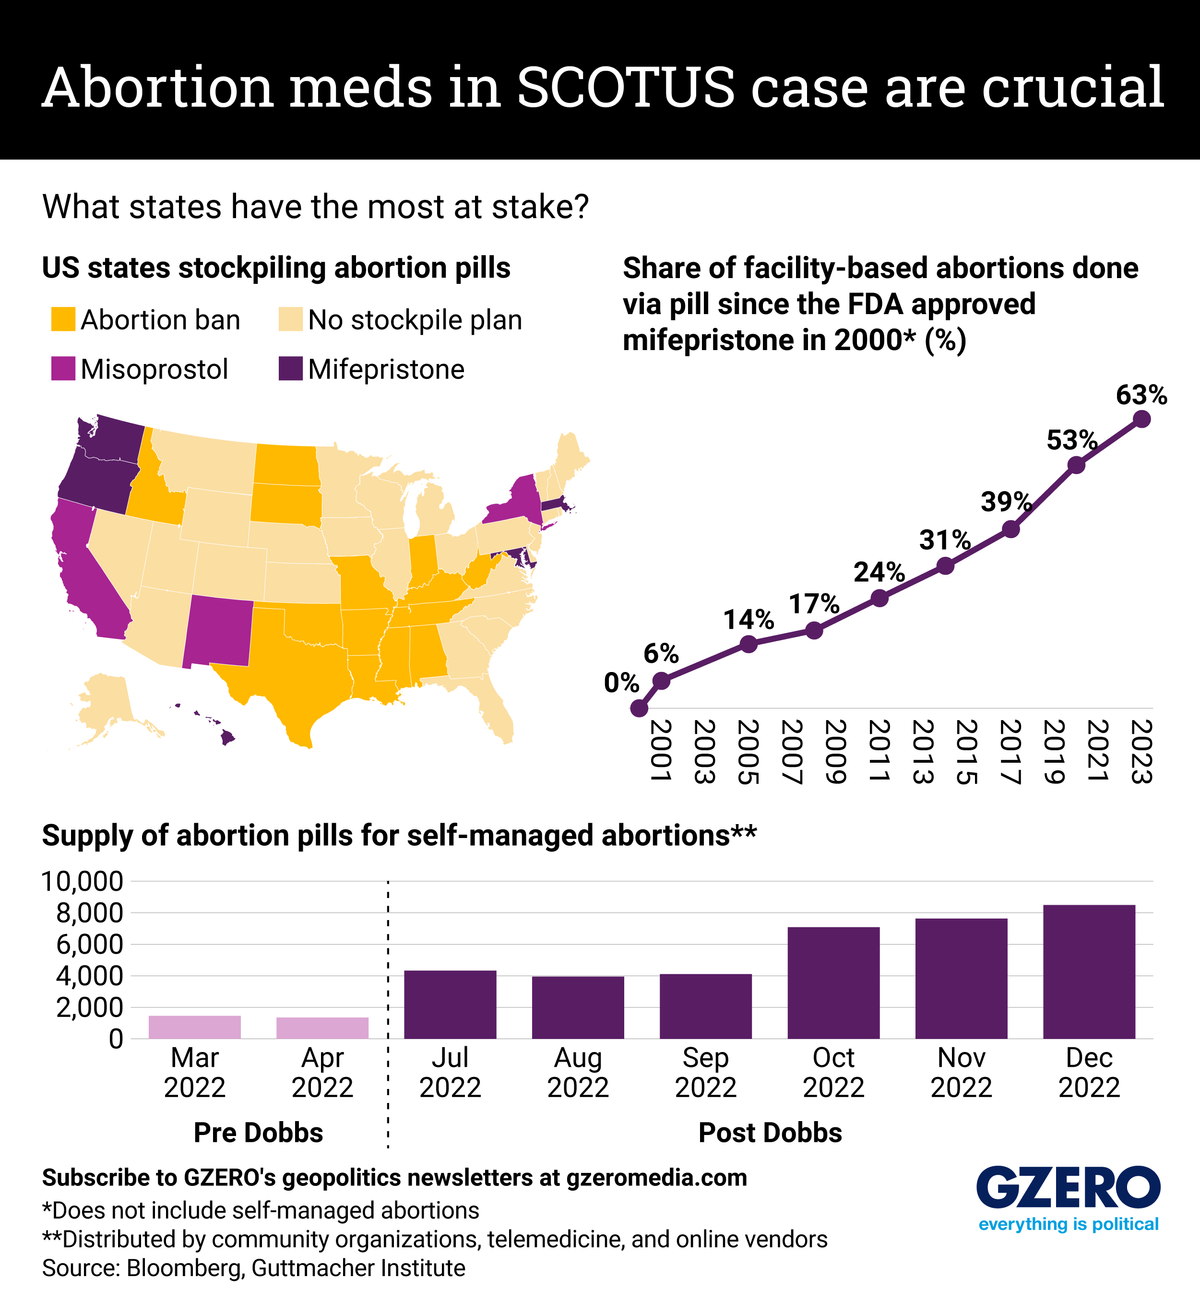 Graphic Truth:  Abortion meds in SCOTUS case are crucial